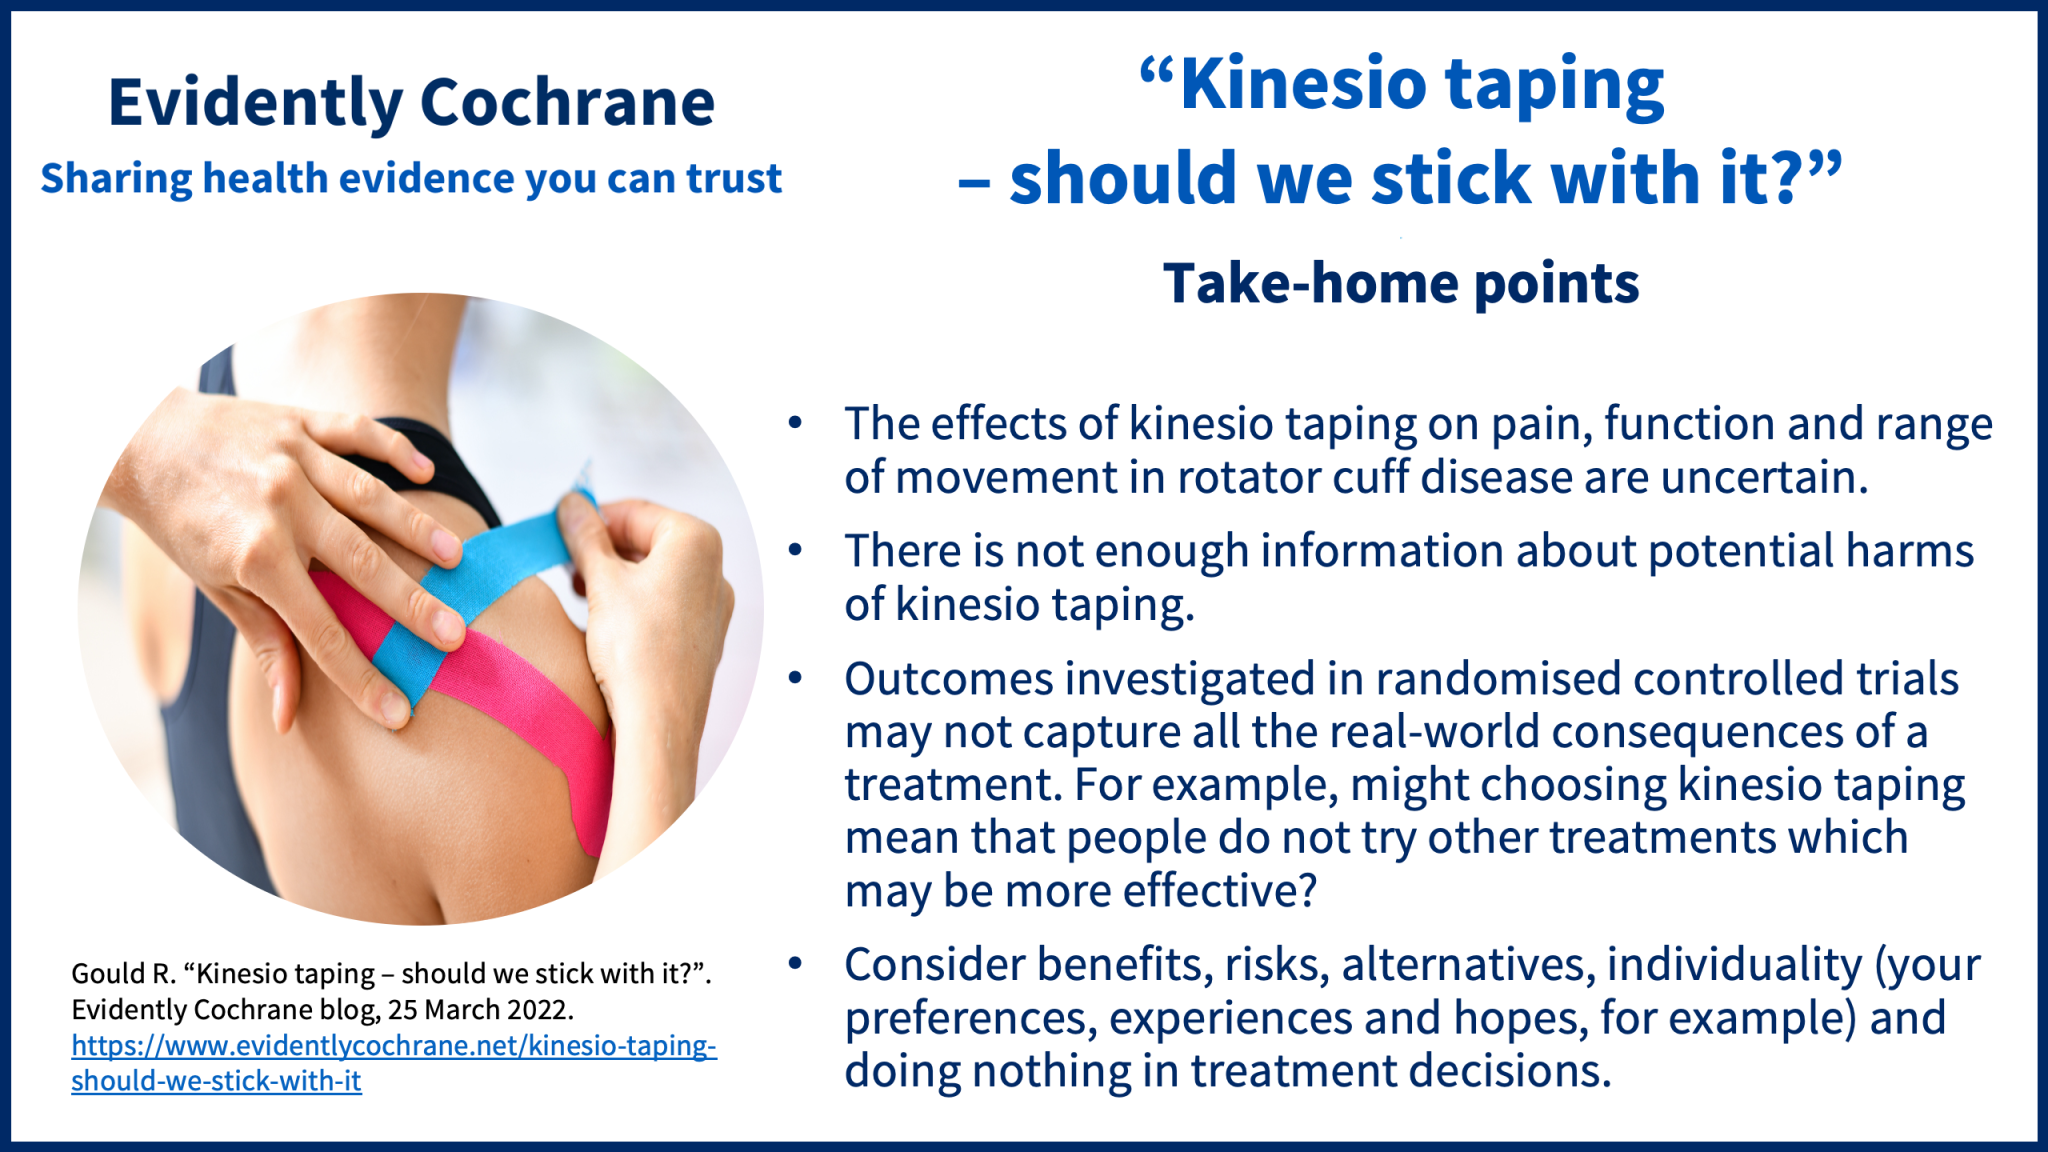 The effects of kinesio taping on pain, function and range of movement in rotator cuff disease are uncertain There is not enough information about potential harms of kinesio taping Outcomes investigated in randomised controlled trials may not capture all the real-world consequences of a treatment. For example, might choosing kinesio taping mean that people do not try other treatments which may be more effective? Consider benefits, risks, alternatives, individuality (your preferences, experiences and hopes, for example) and doing nothing in treatment decisions